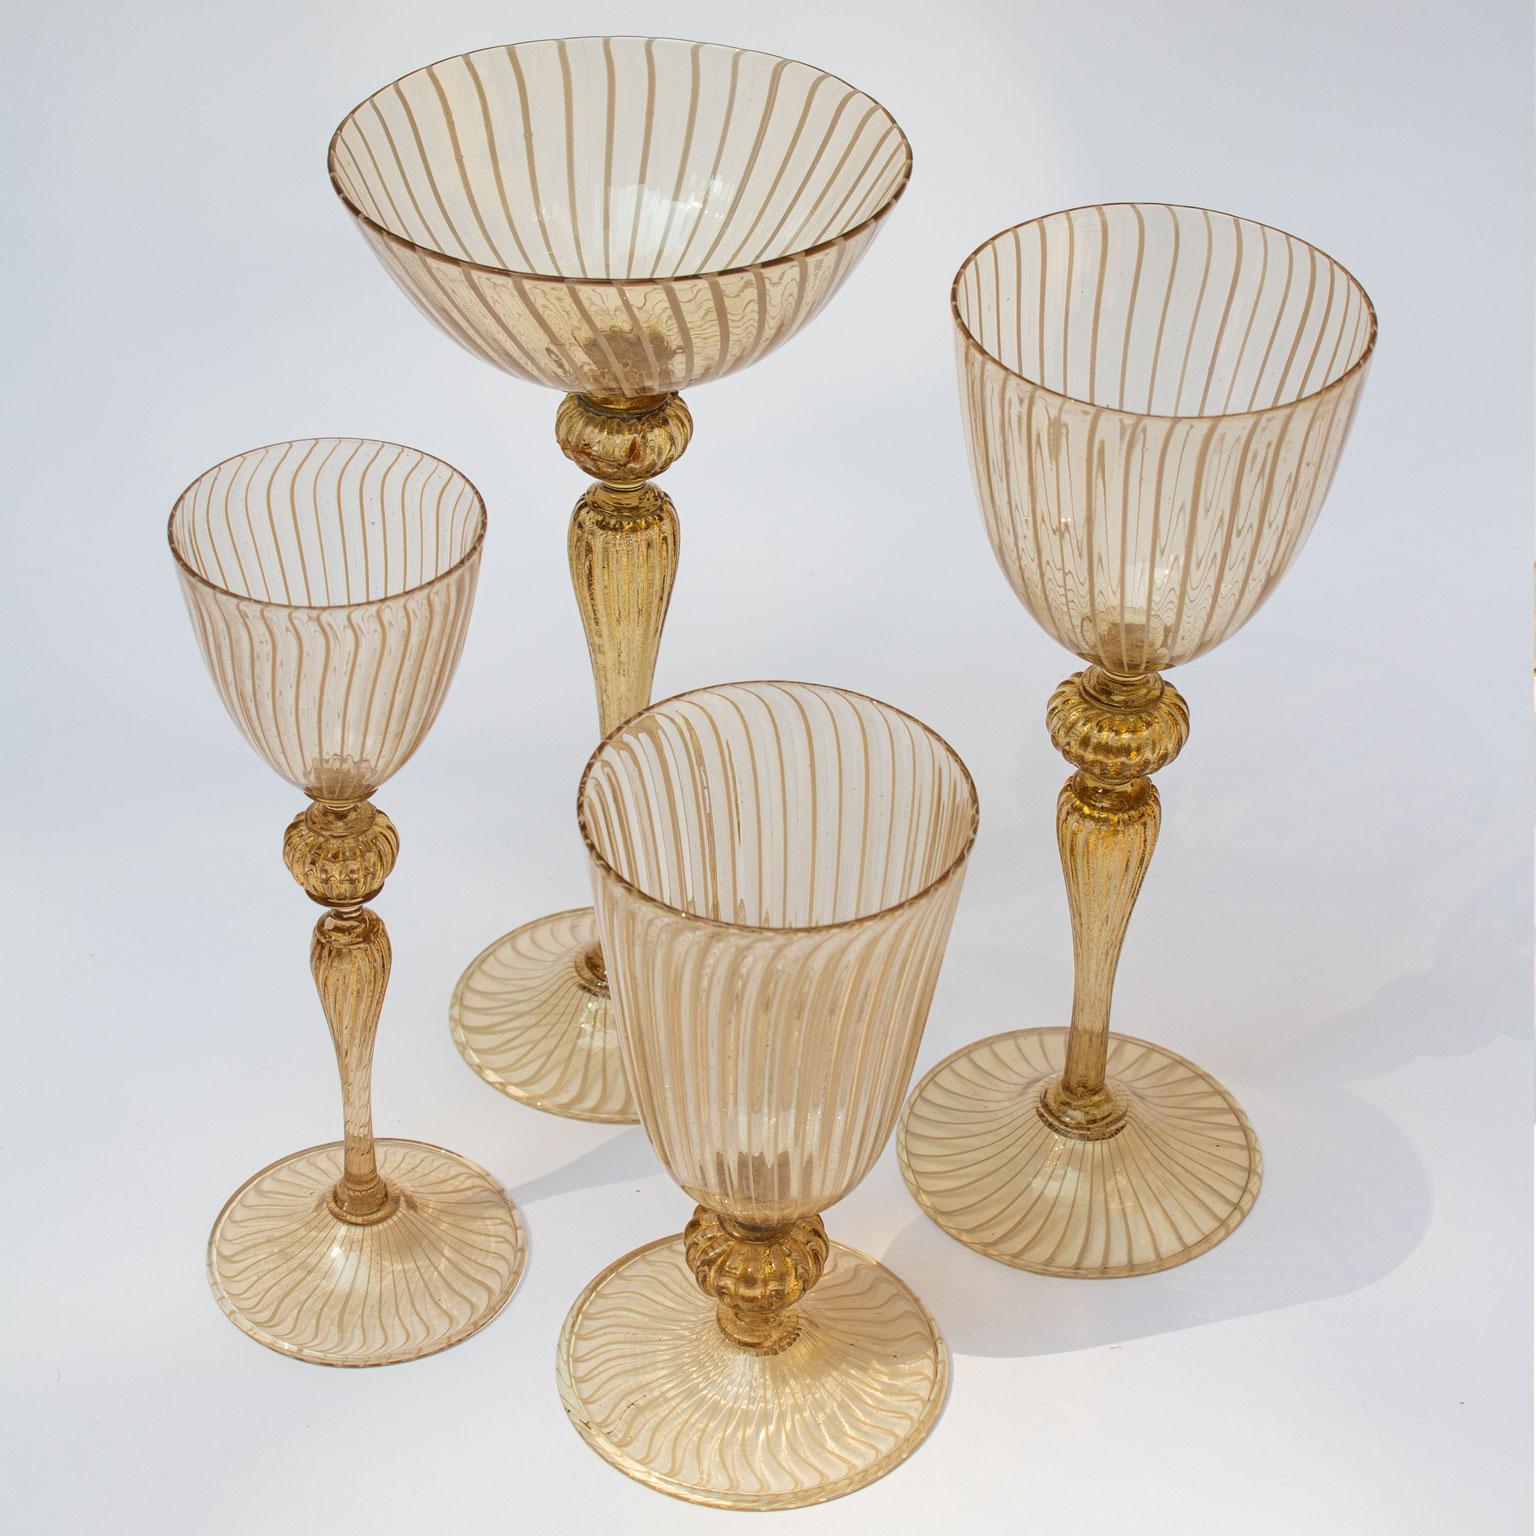 Handblown Lattice Murano stemware service for eight persons without a single chip. Featuring beautiful champagne goblets, red- and white wine goblets, aperitif glasses, plates and bowls creating a lovely table setting. The glass is lightly yellow